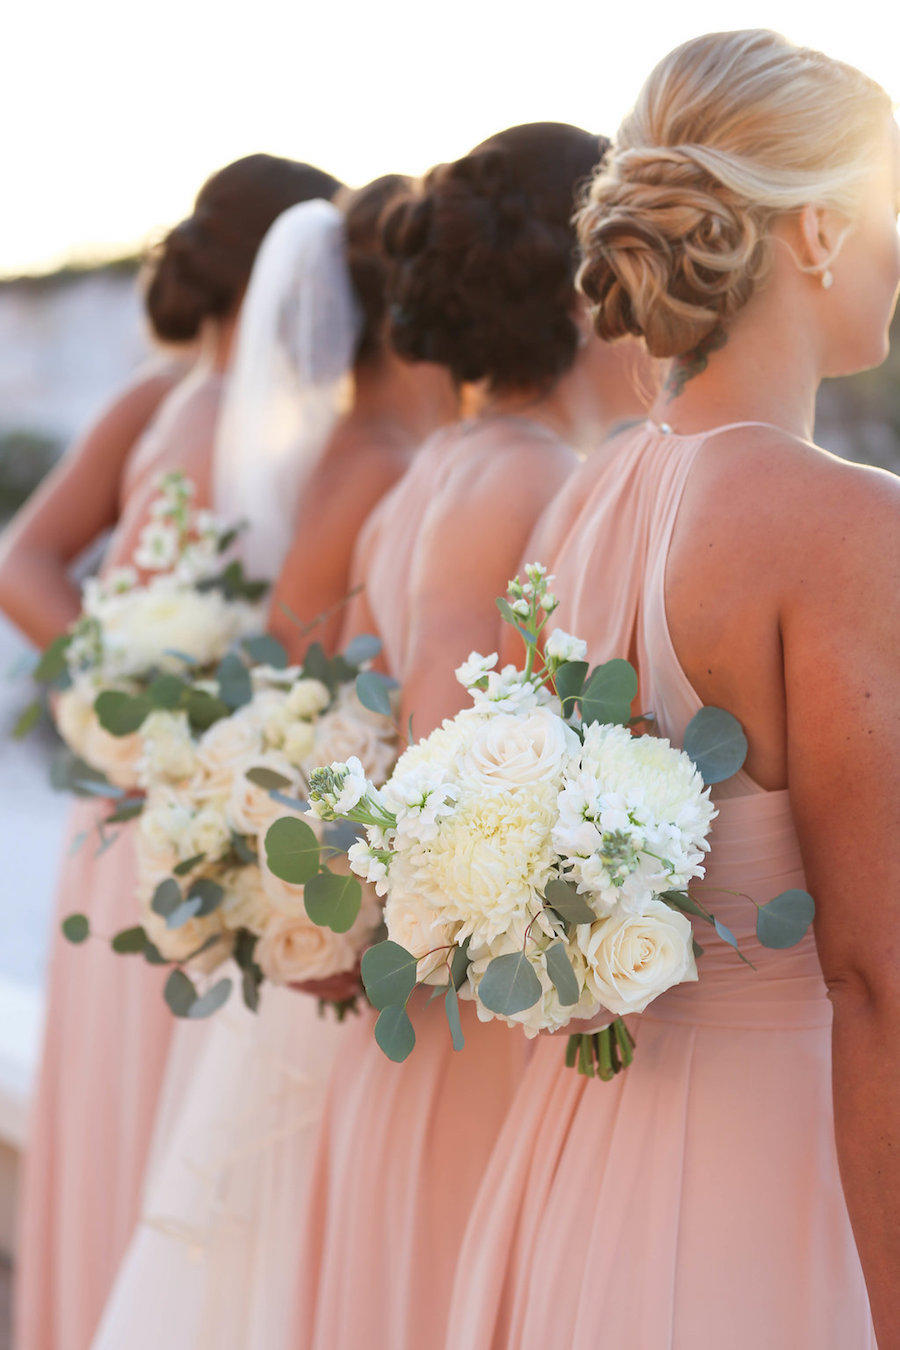 Bridal Party Portrait with Blush Tulle Azazie Bridesmaid Dresses and White Rose with Natural Greenery Bouquets | Tampa Bay Wedding